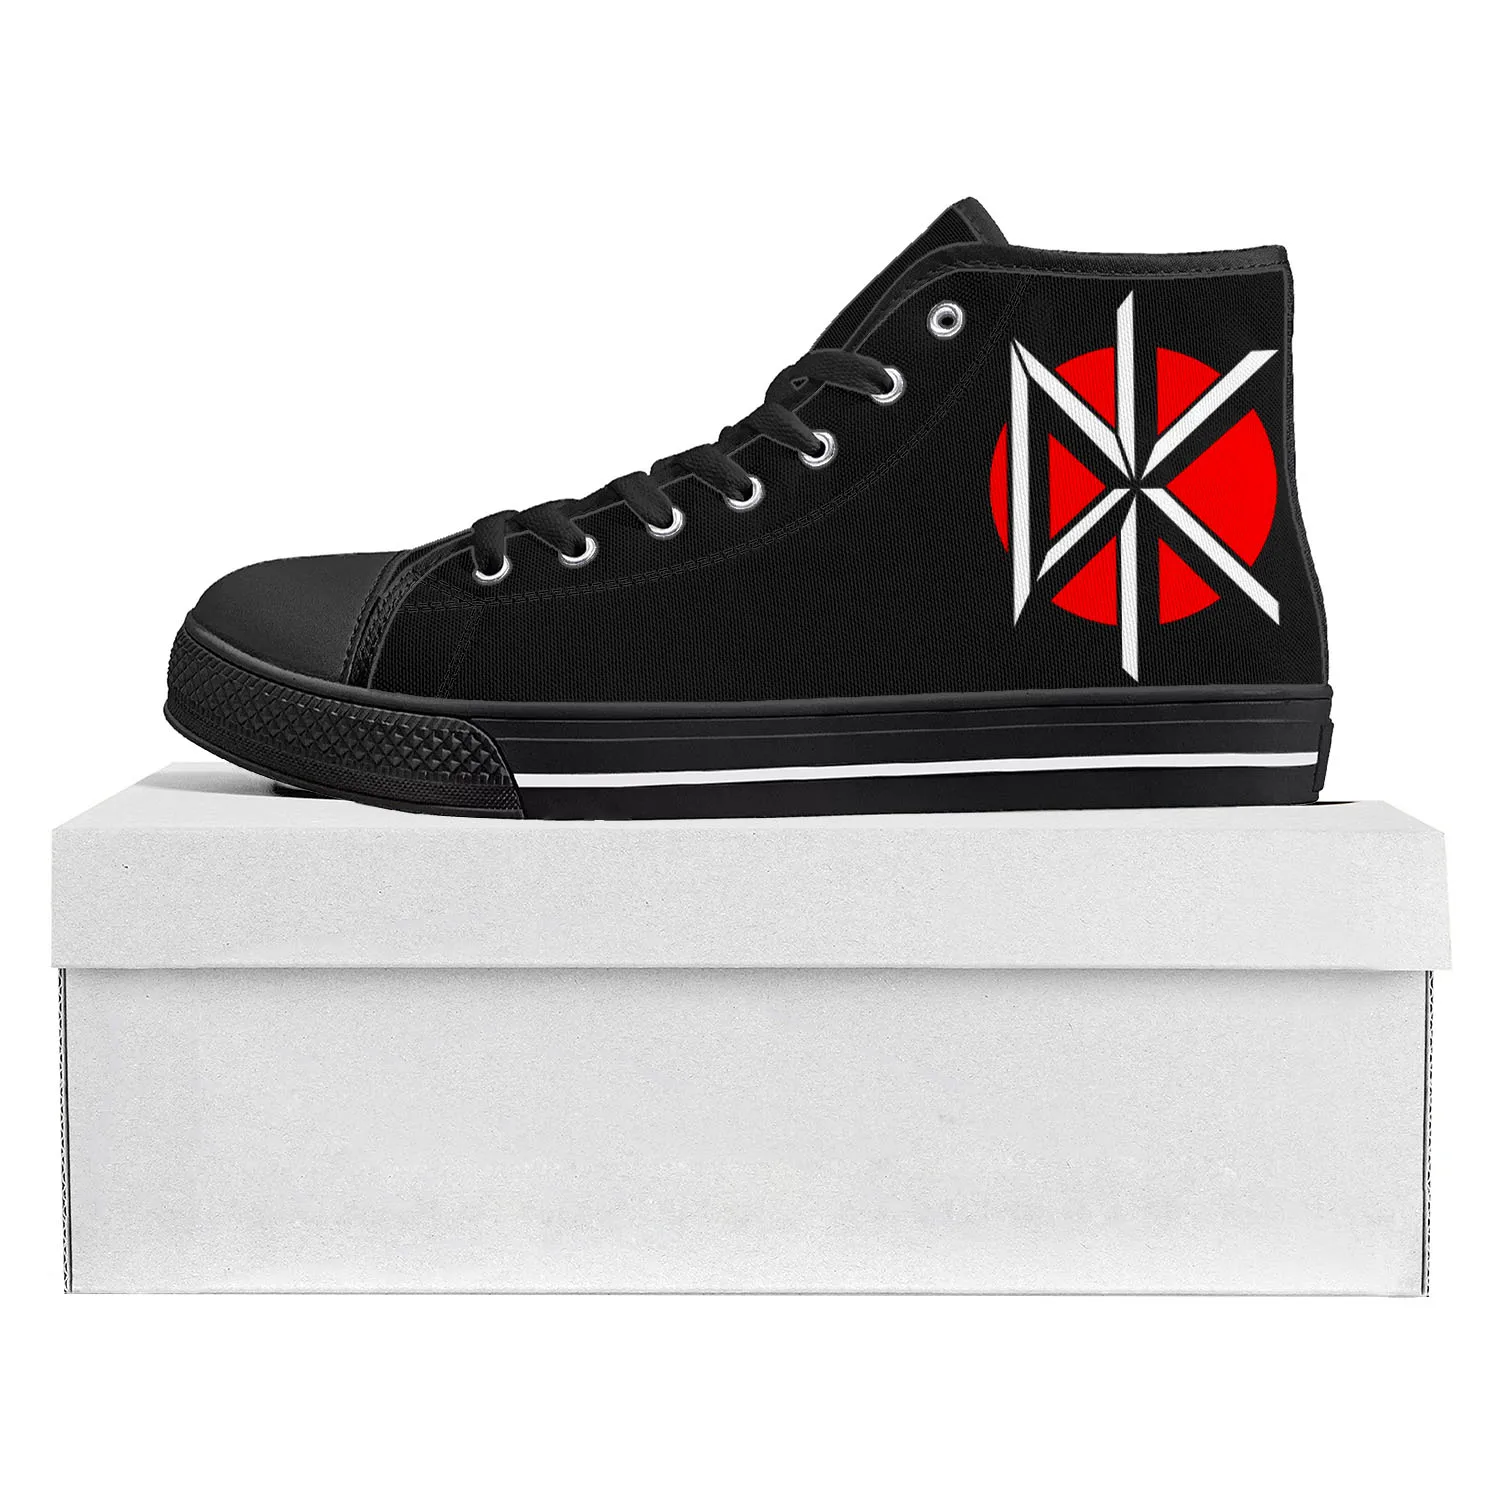 

Dead Kennedys High Top Rock Band Sneakers Mens Womens Teenager Level Canvas Cherry Red Sneaker Couple Casual Sports Shoes